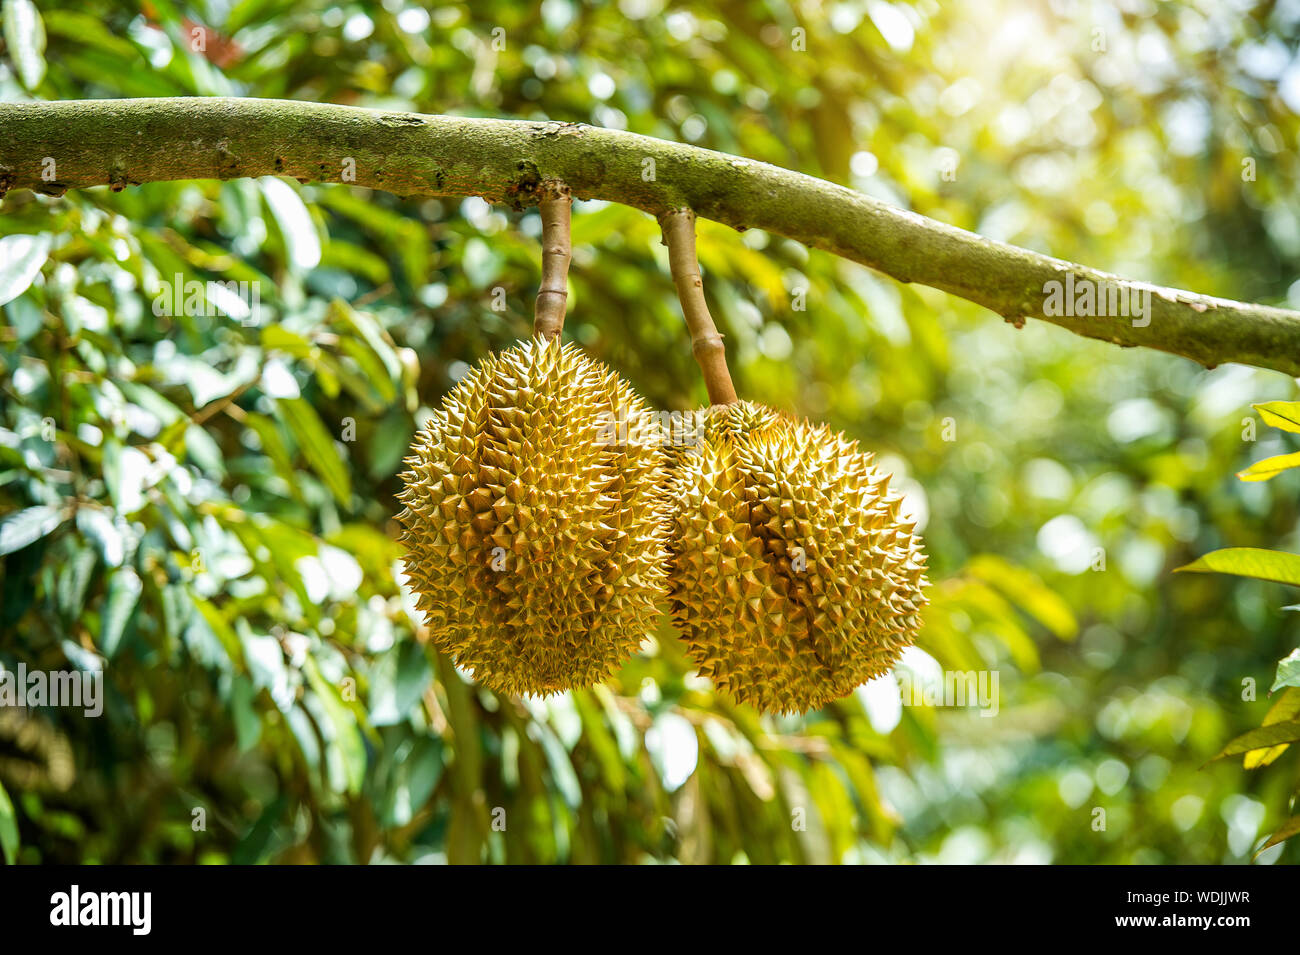 Close-up Of Spiked Fruits Growing On Tree Stock Photo